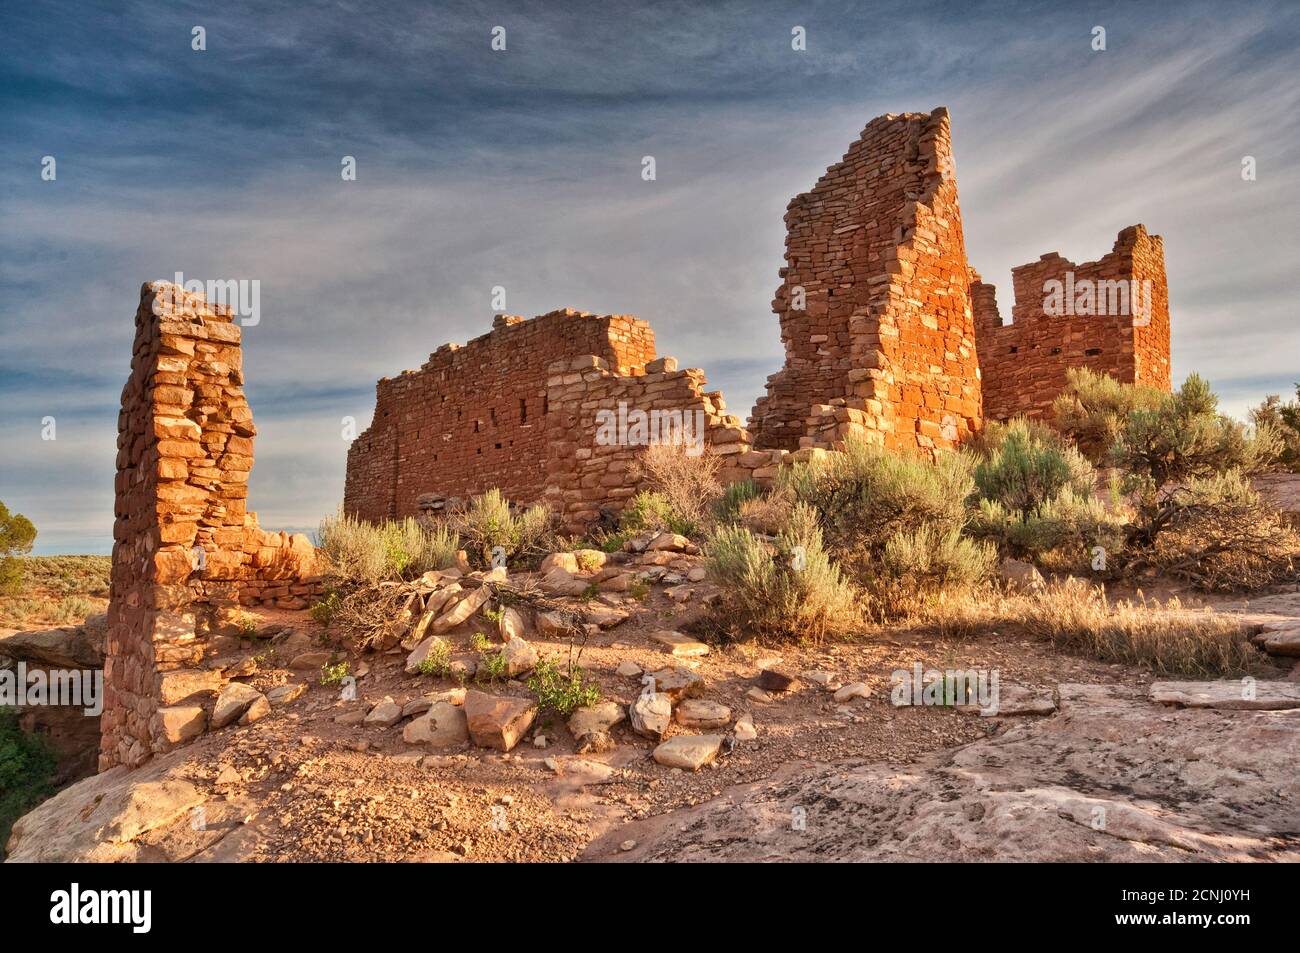 Hovenweep  Castle ruin at Hovenweep National Monument, Colorado Plateau, Utah, USA Stock Photo